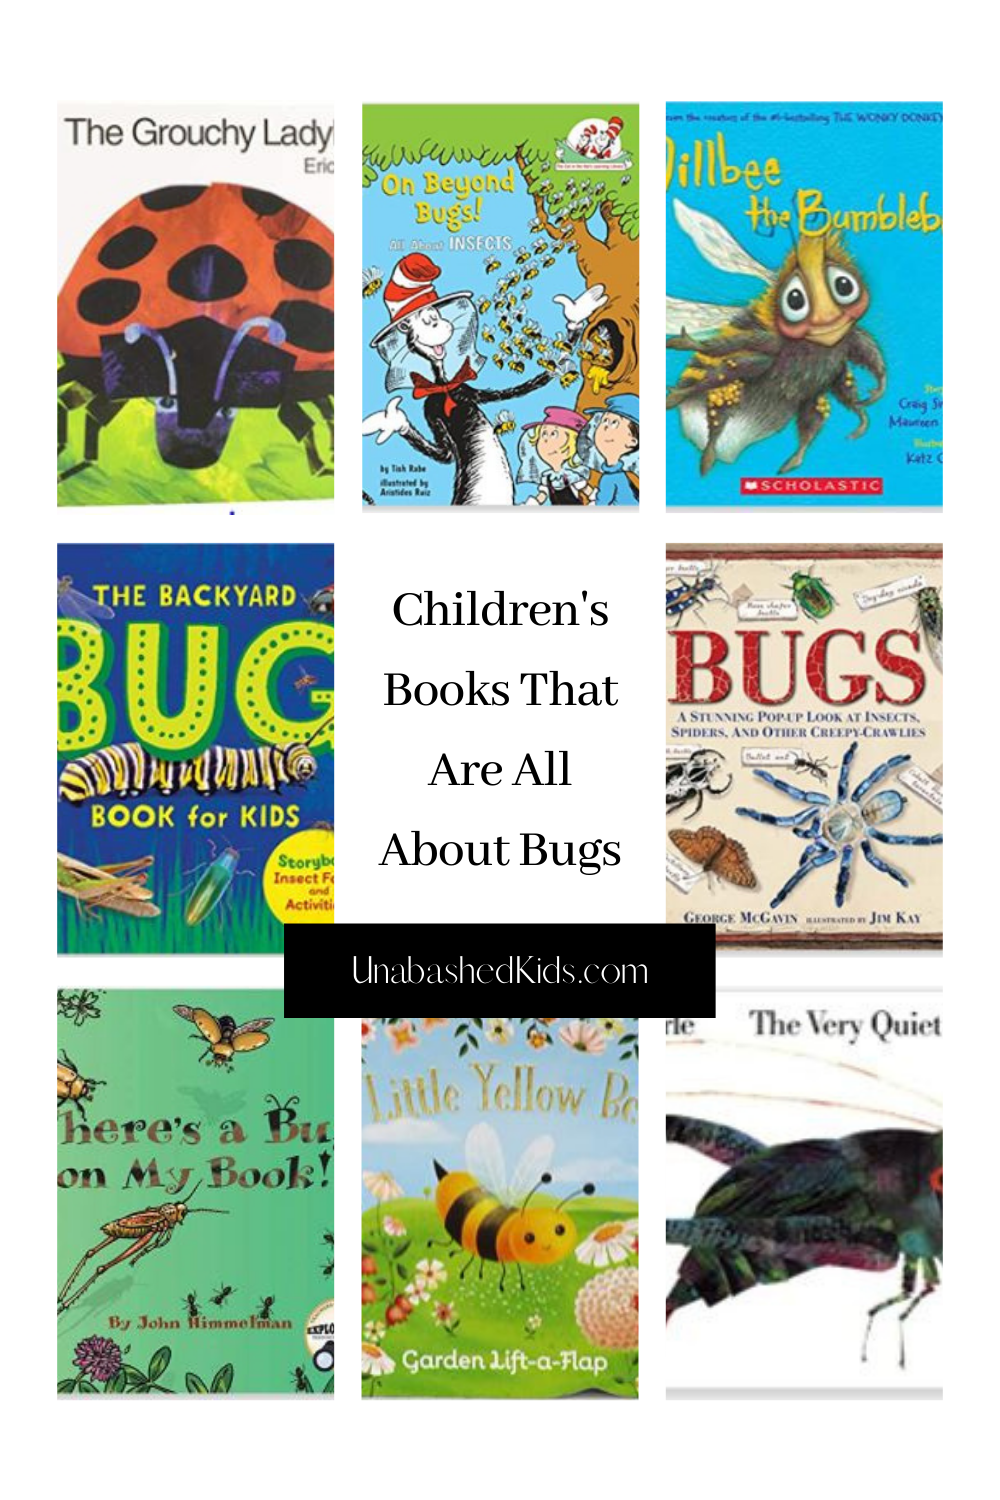 Children's books that are all about bugs